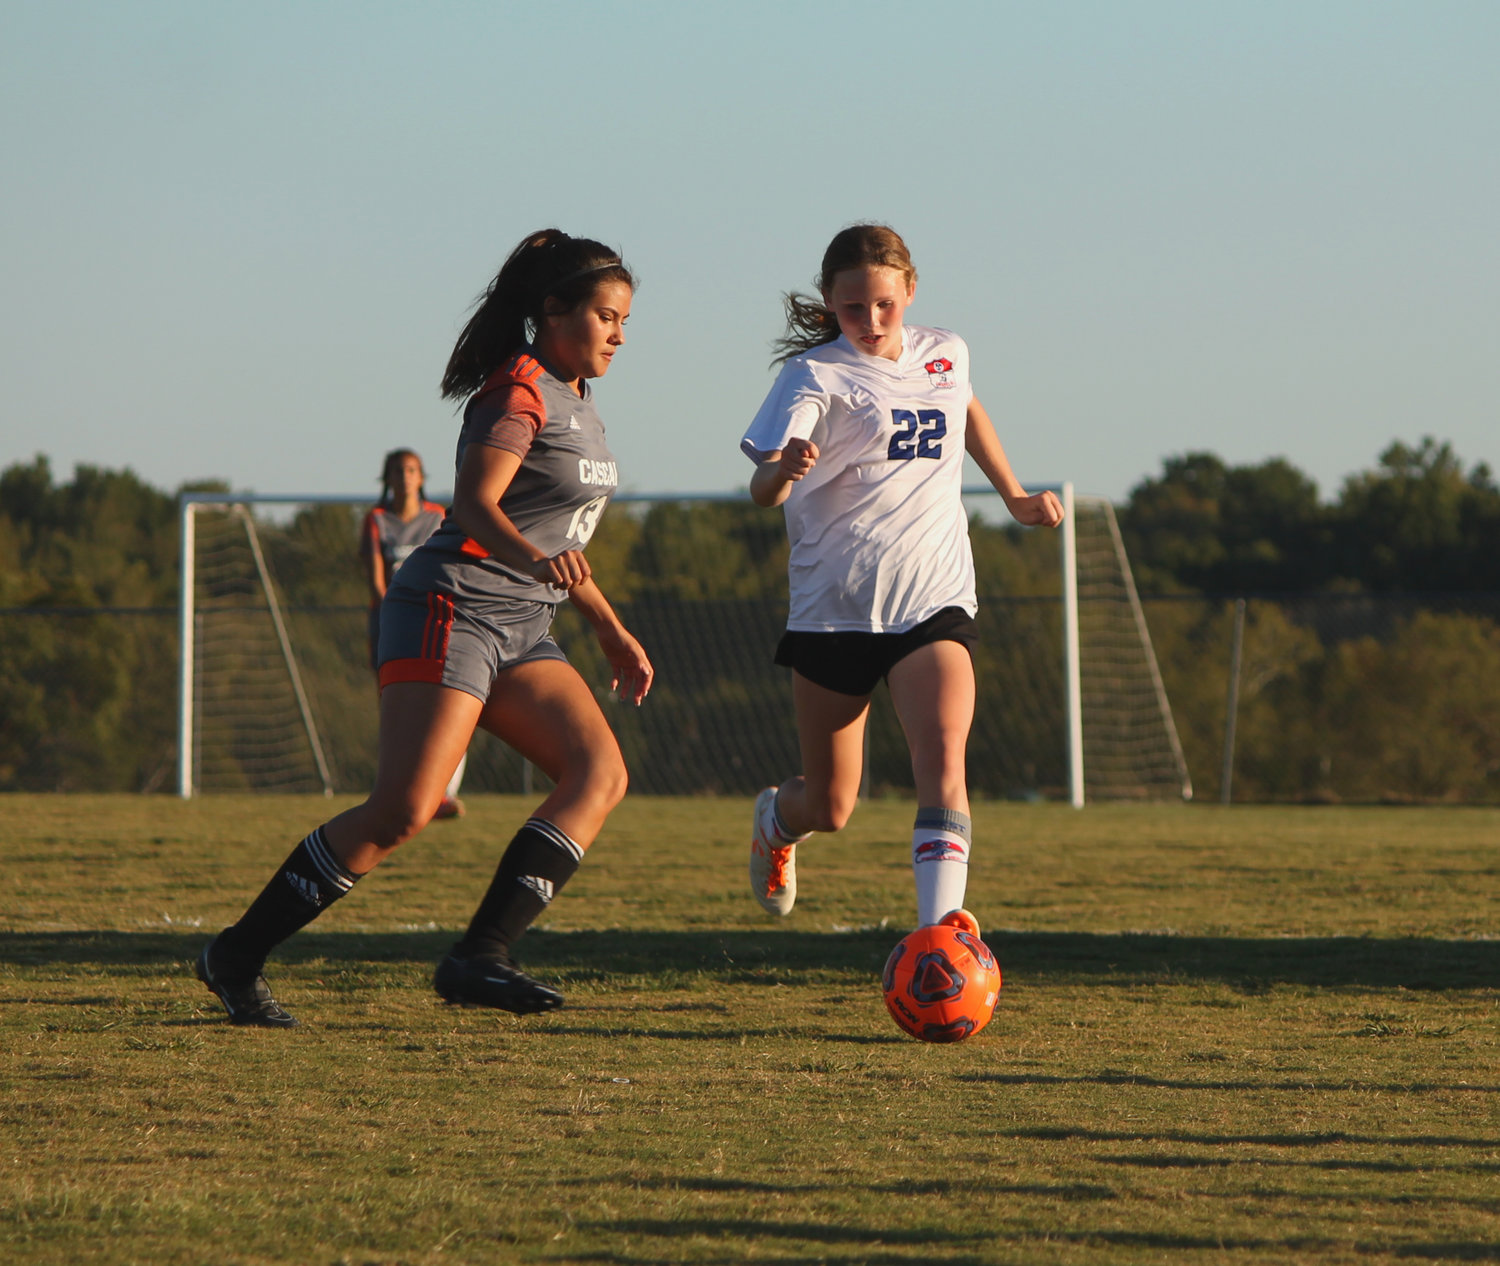 The Forrest Lady Rockets claimed a key road victory on Tuesday night, beating Cascade in a 1-0 thriller on the road. Jadeyn Stalnecker’s 26th minute goal was the only score of the match as the Lady Rockets held on to claim the district win.